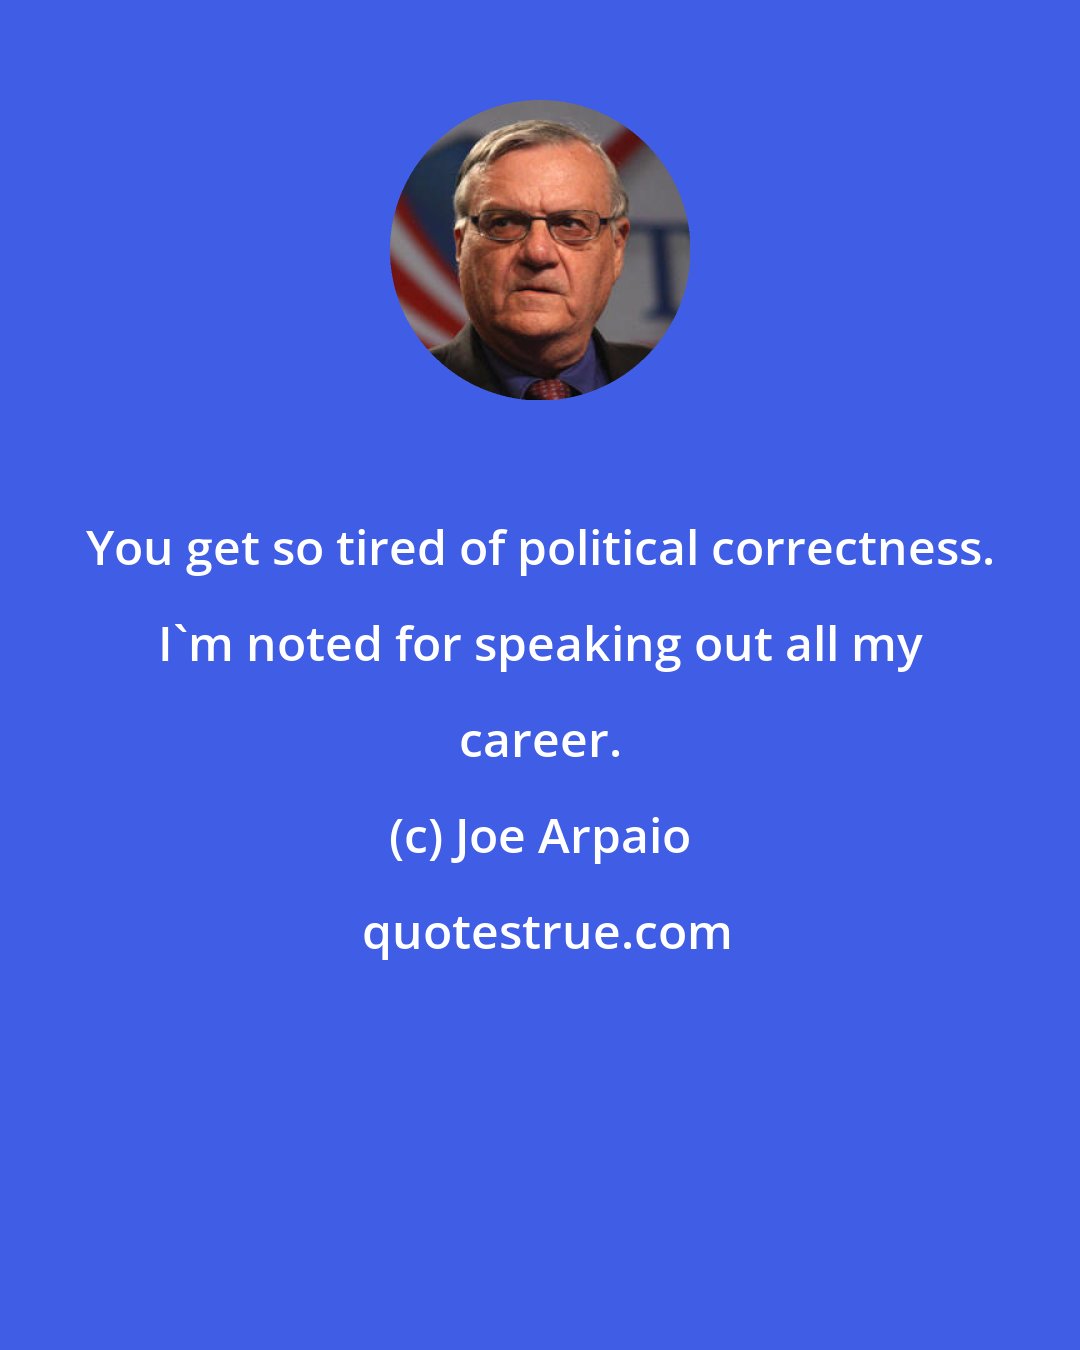 Joe Arpaio: You get so tired of political correctness. I'm noted for speaking out all my career.